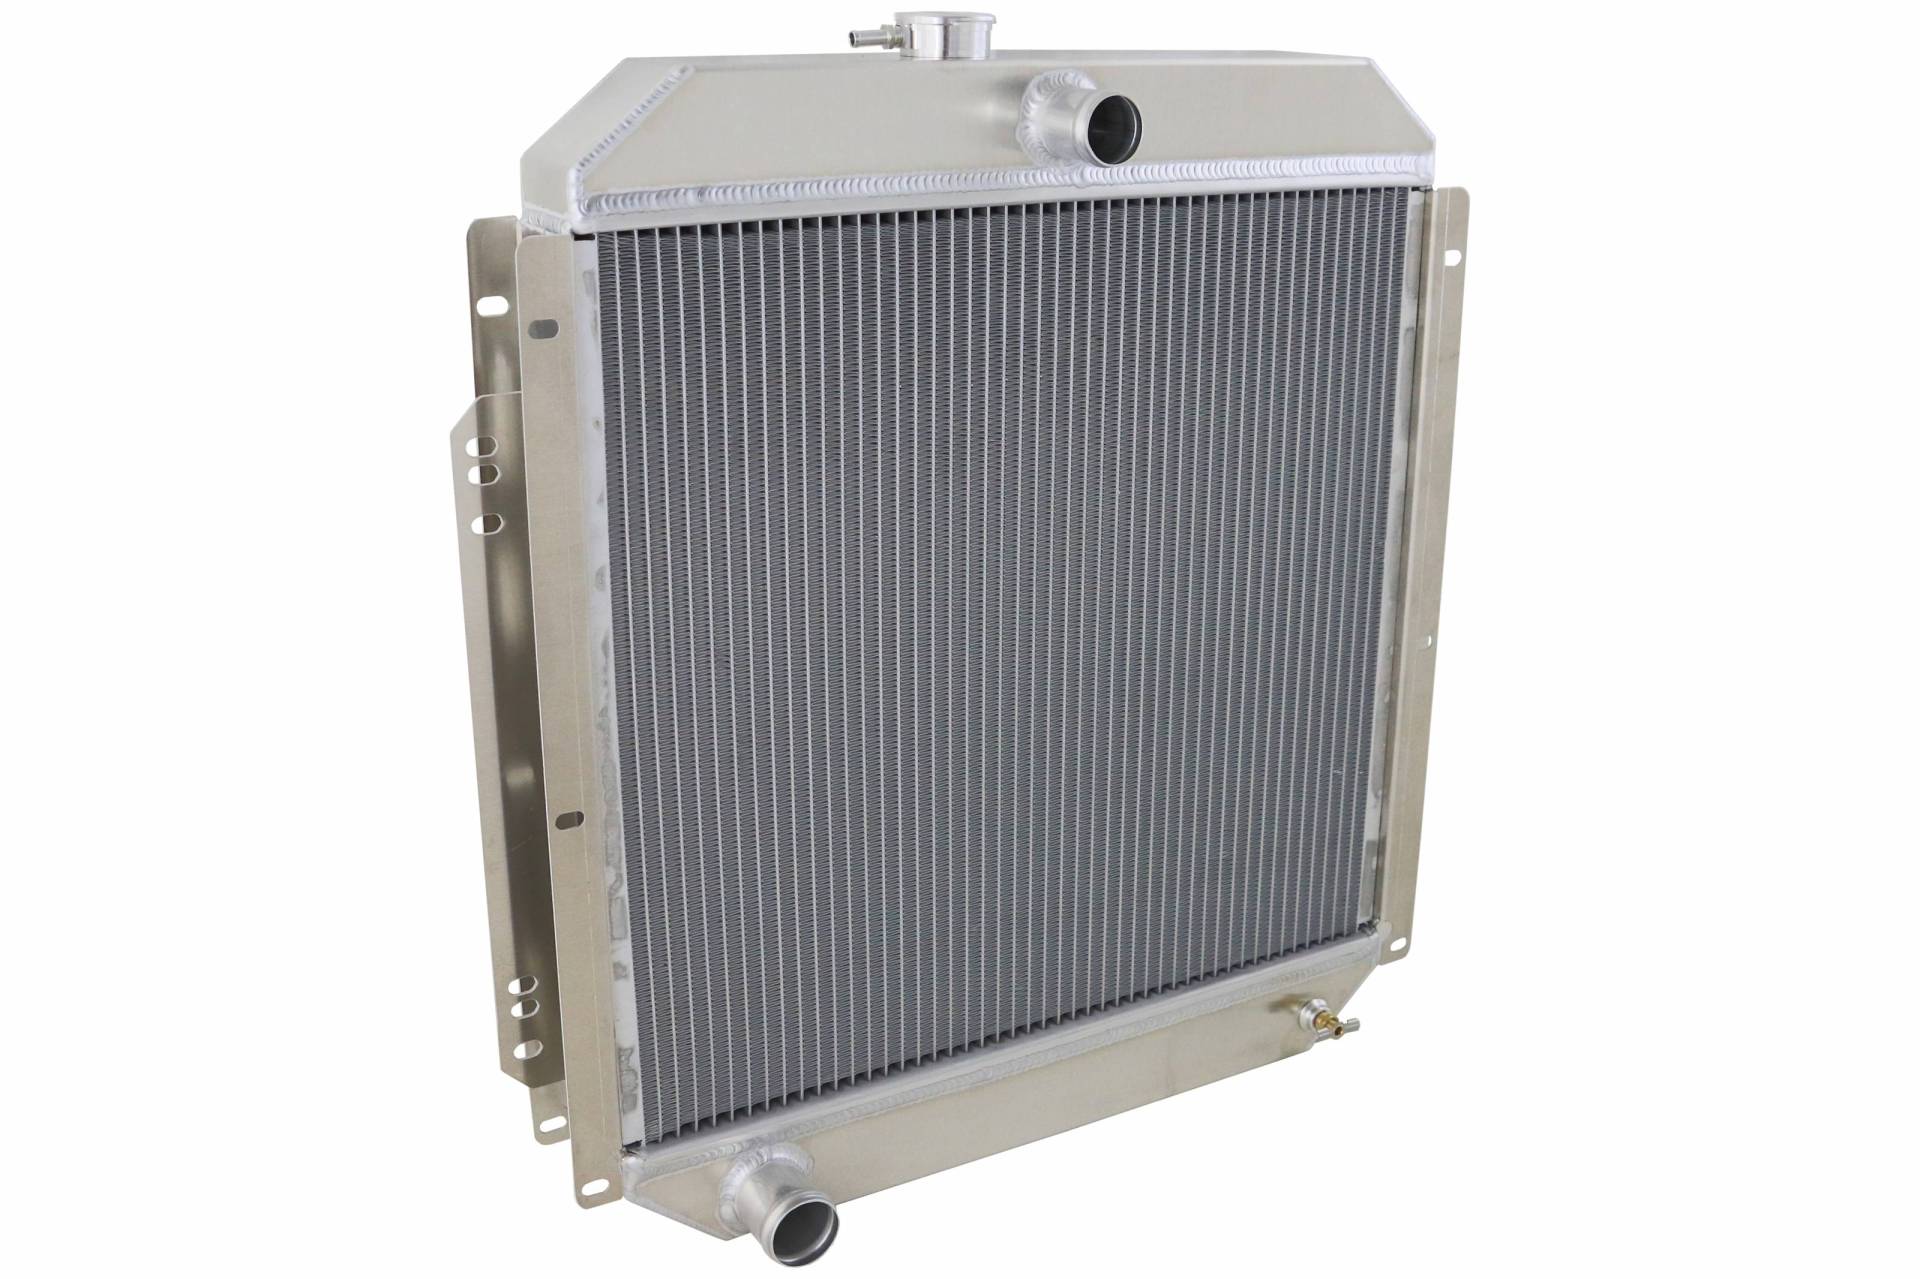 Wizard Cooling Inc - Wizard Cooling - 1953-1956 Ford Trucks Aluminum Radiator - 98502-100